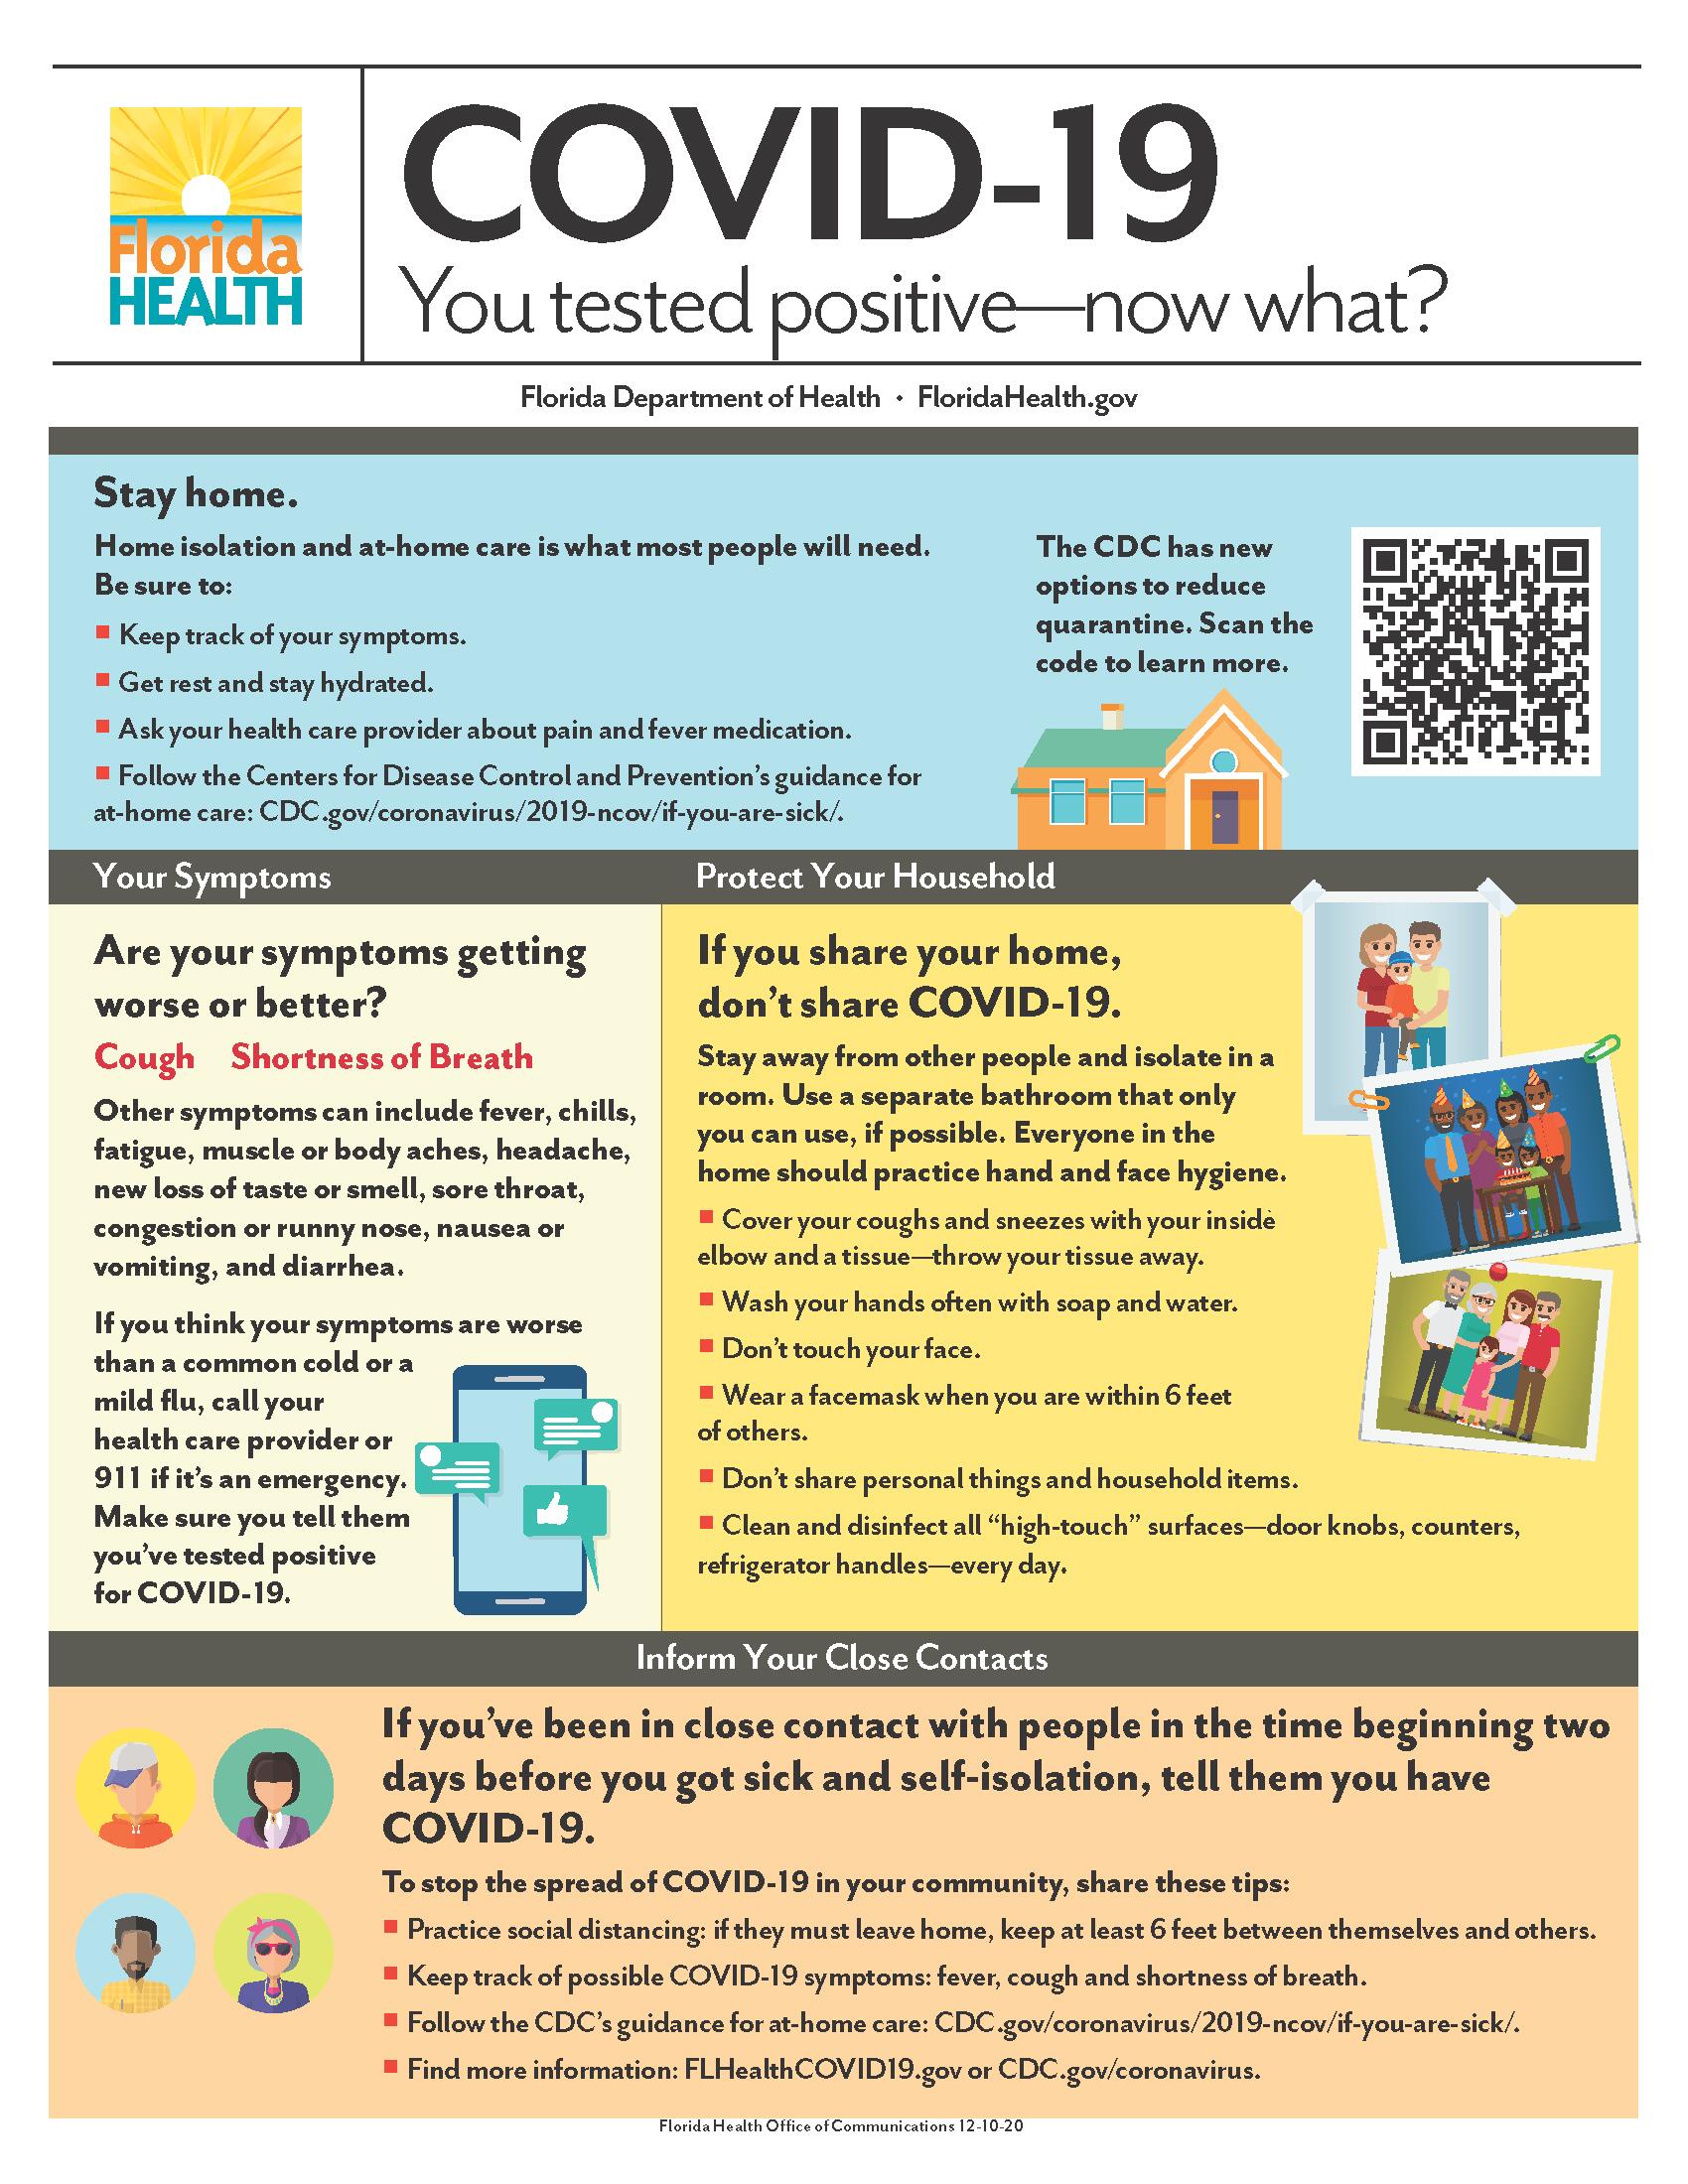 You tested positive - now what? flyer